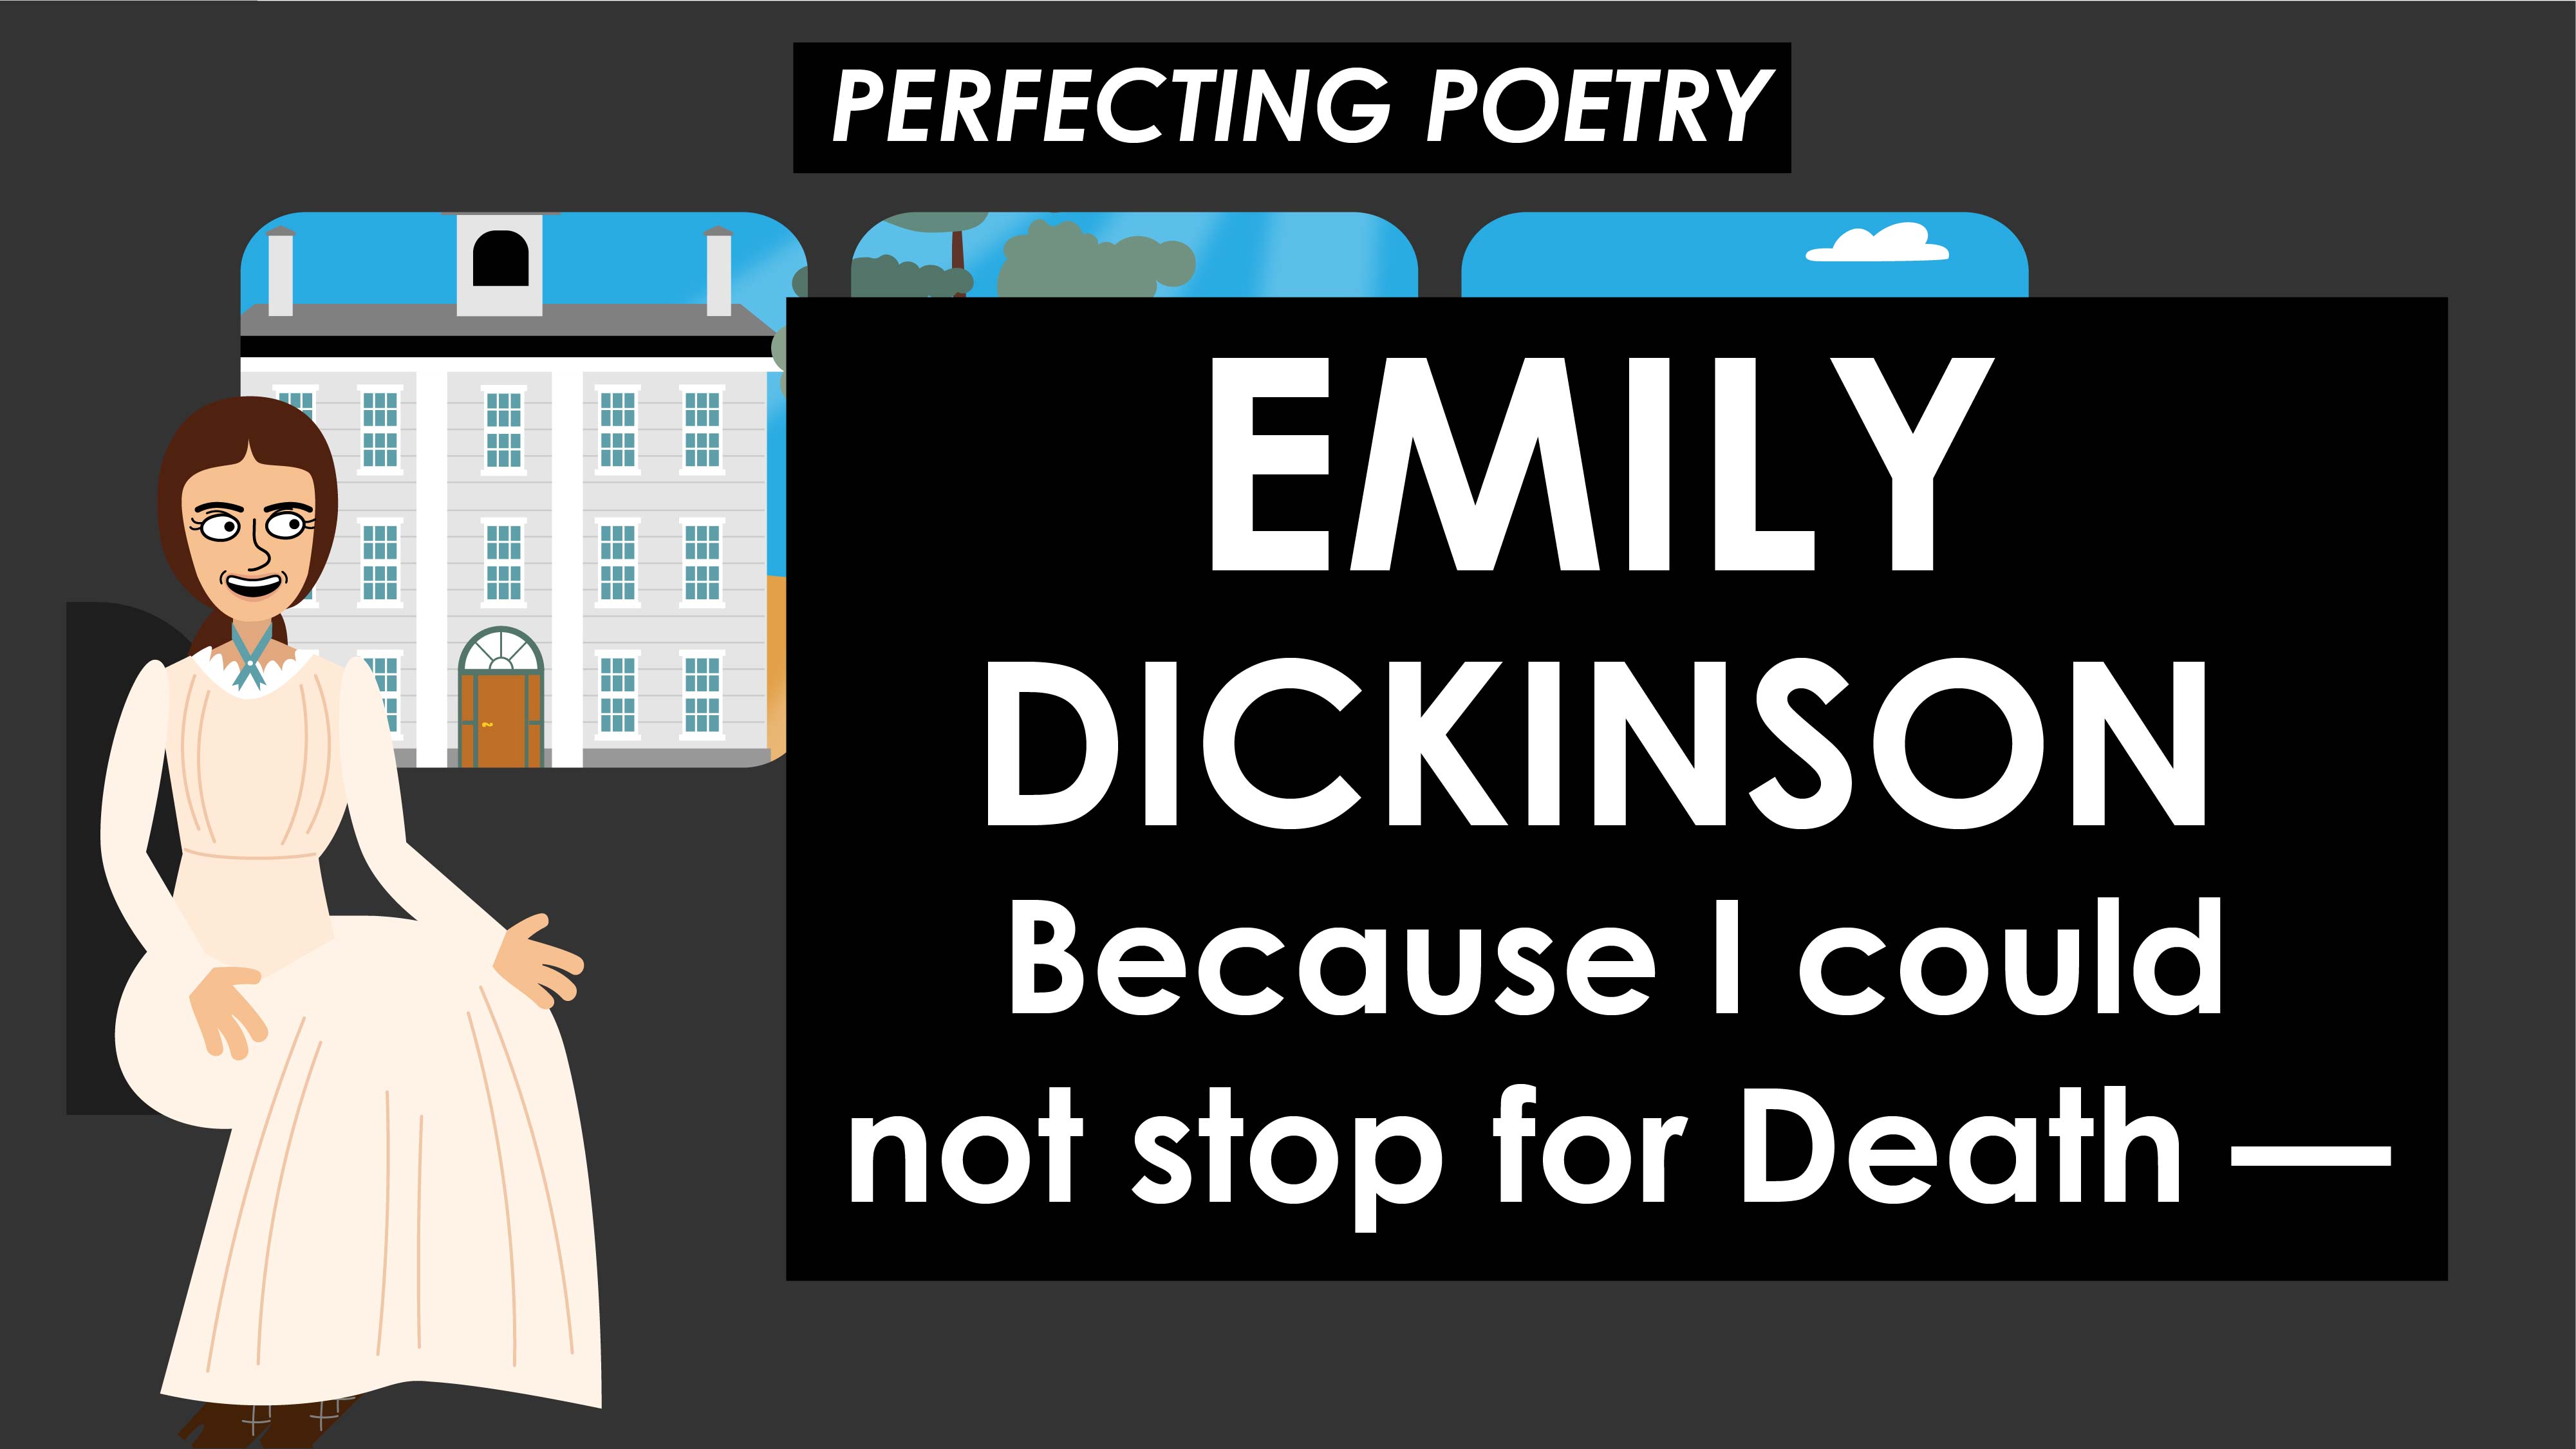 Because I could not stop for Death — - Emily Dickinson - Perfecting Poetry